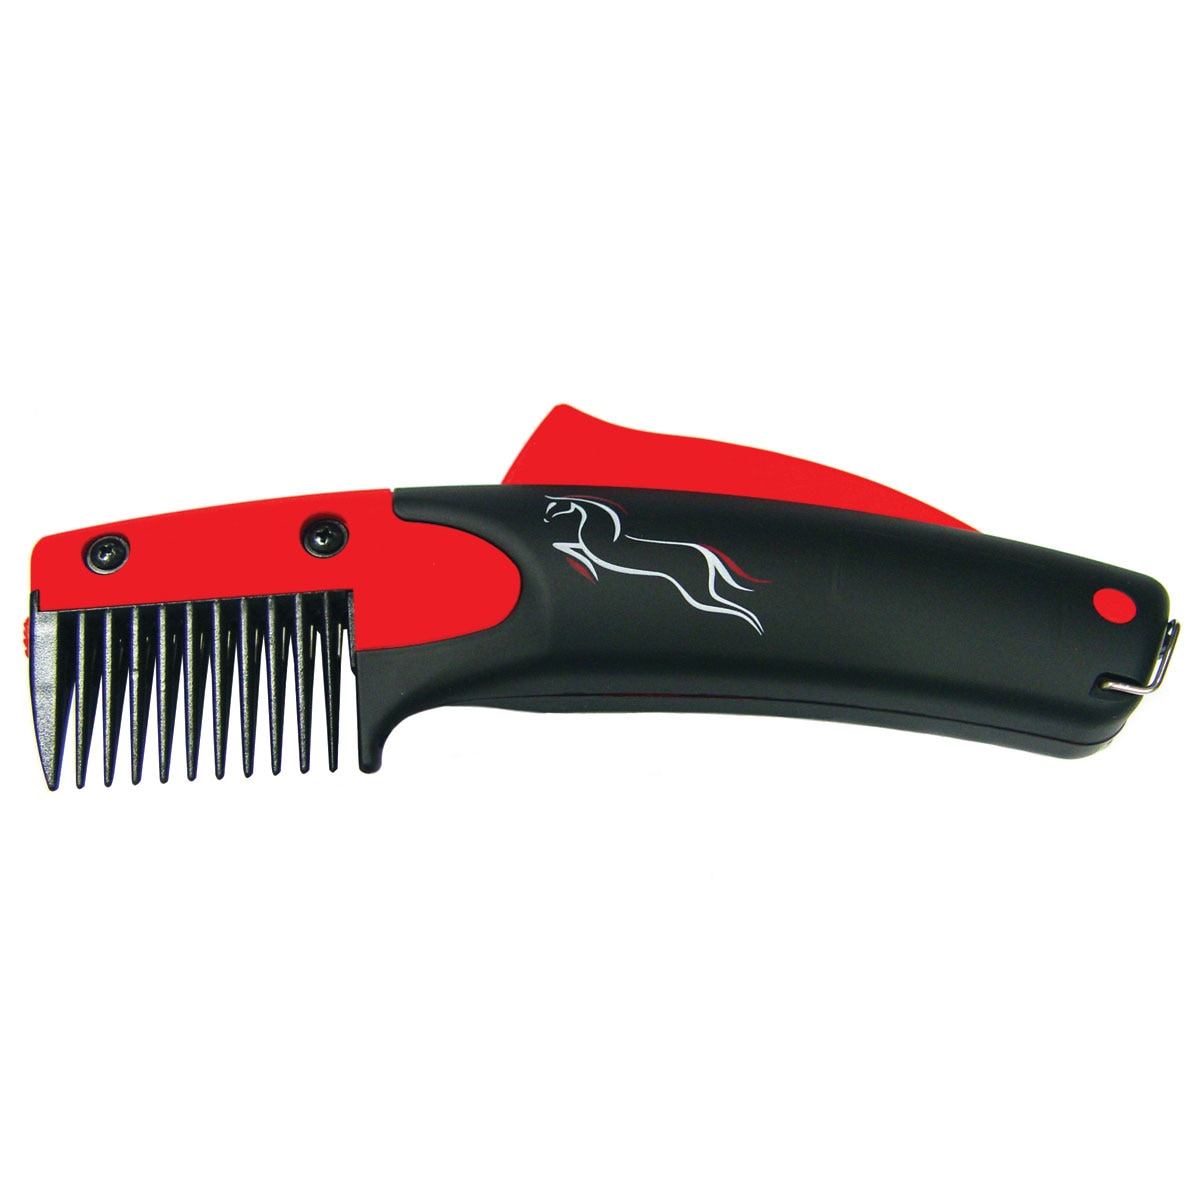 mane and tail trimming for horses and dogs Solocomb MK 111 